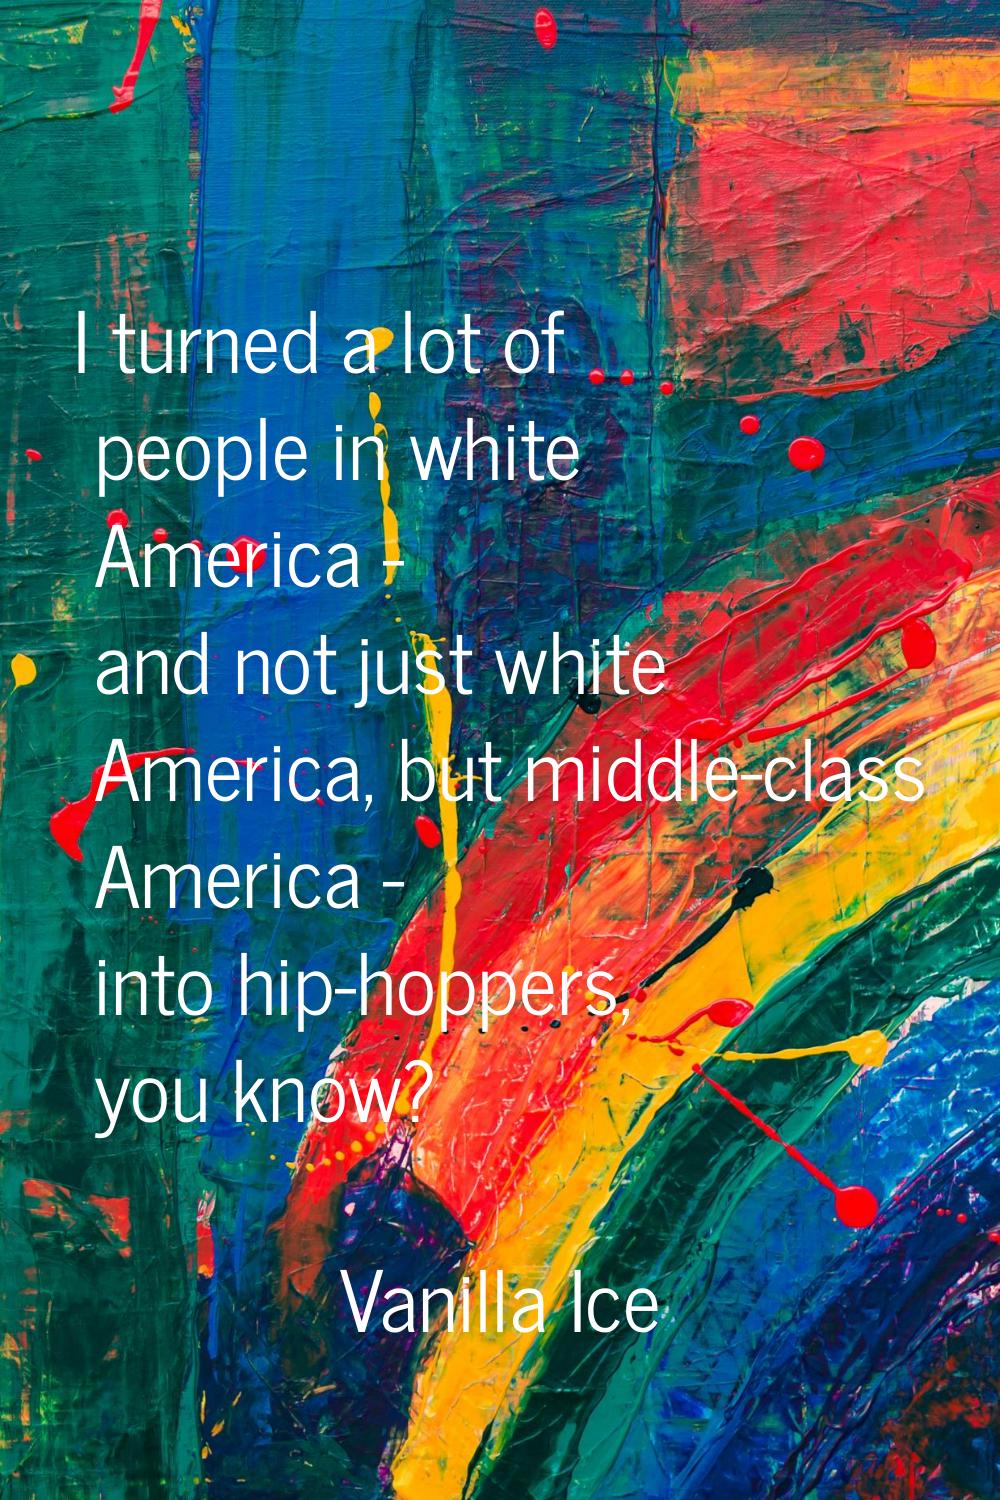 I turned a lot of people in white America - and not just white America, but middle-class America - 